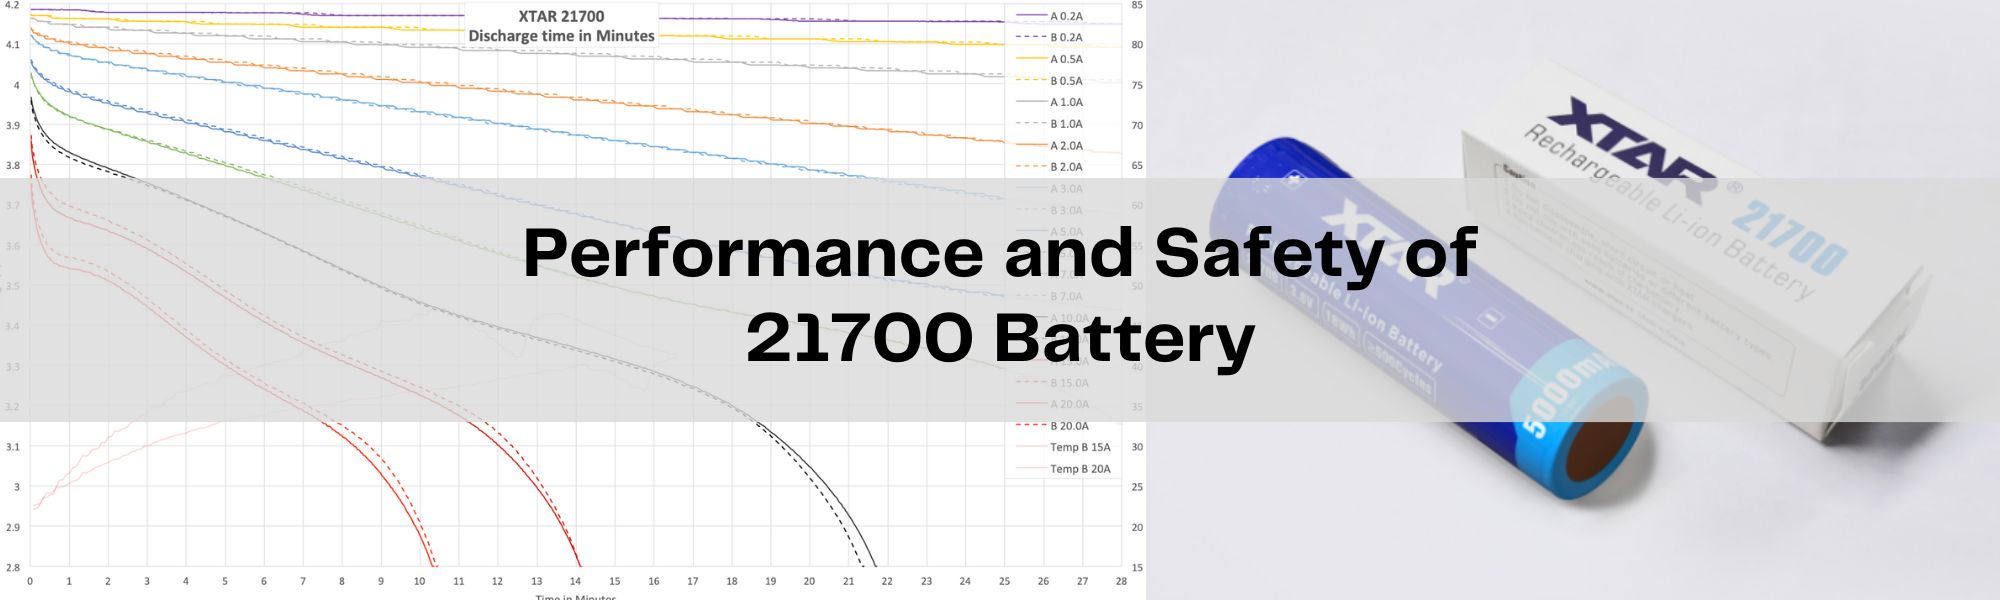 Performance and safety of 21700 battery